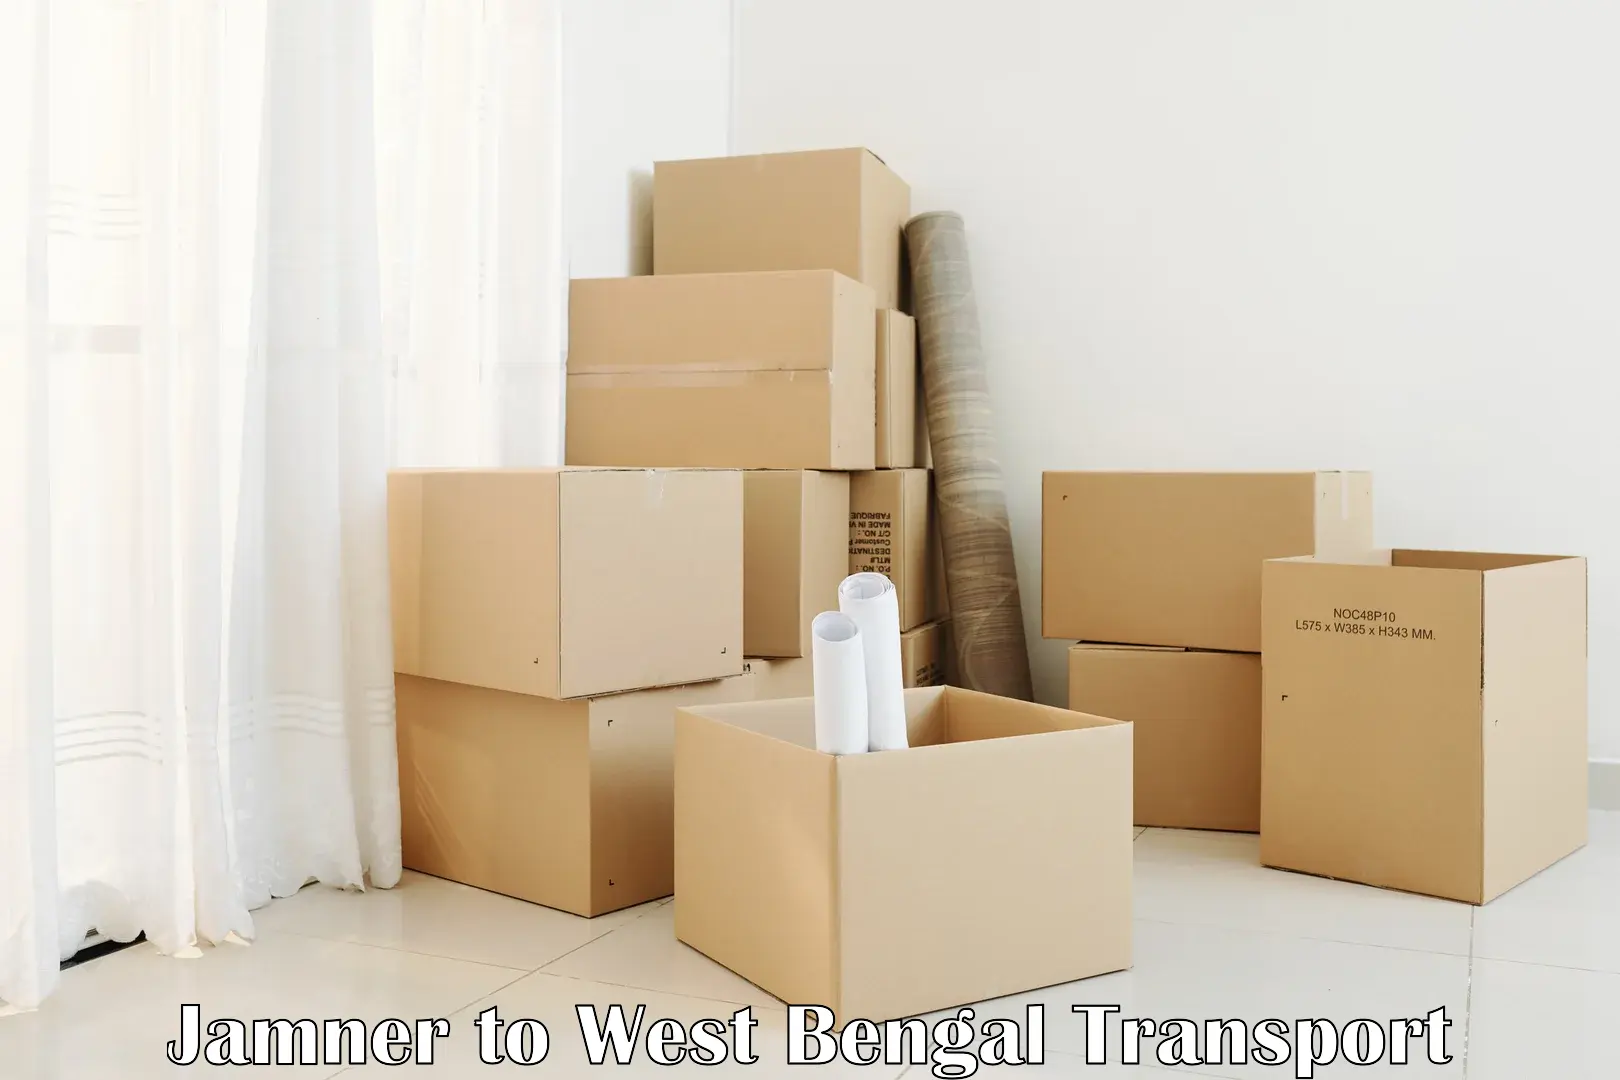 Cycle transportation service Jamner to West Bengal